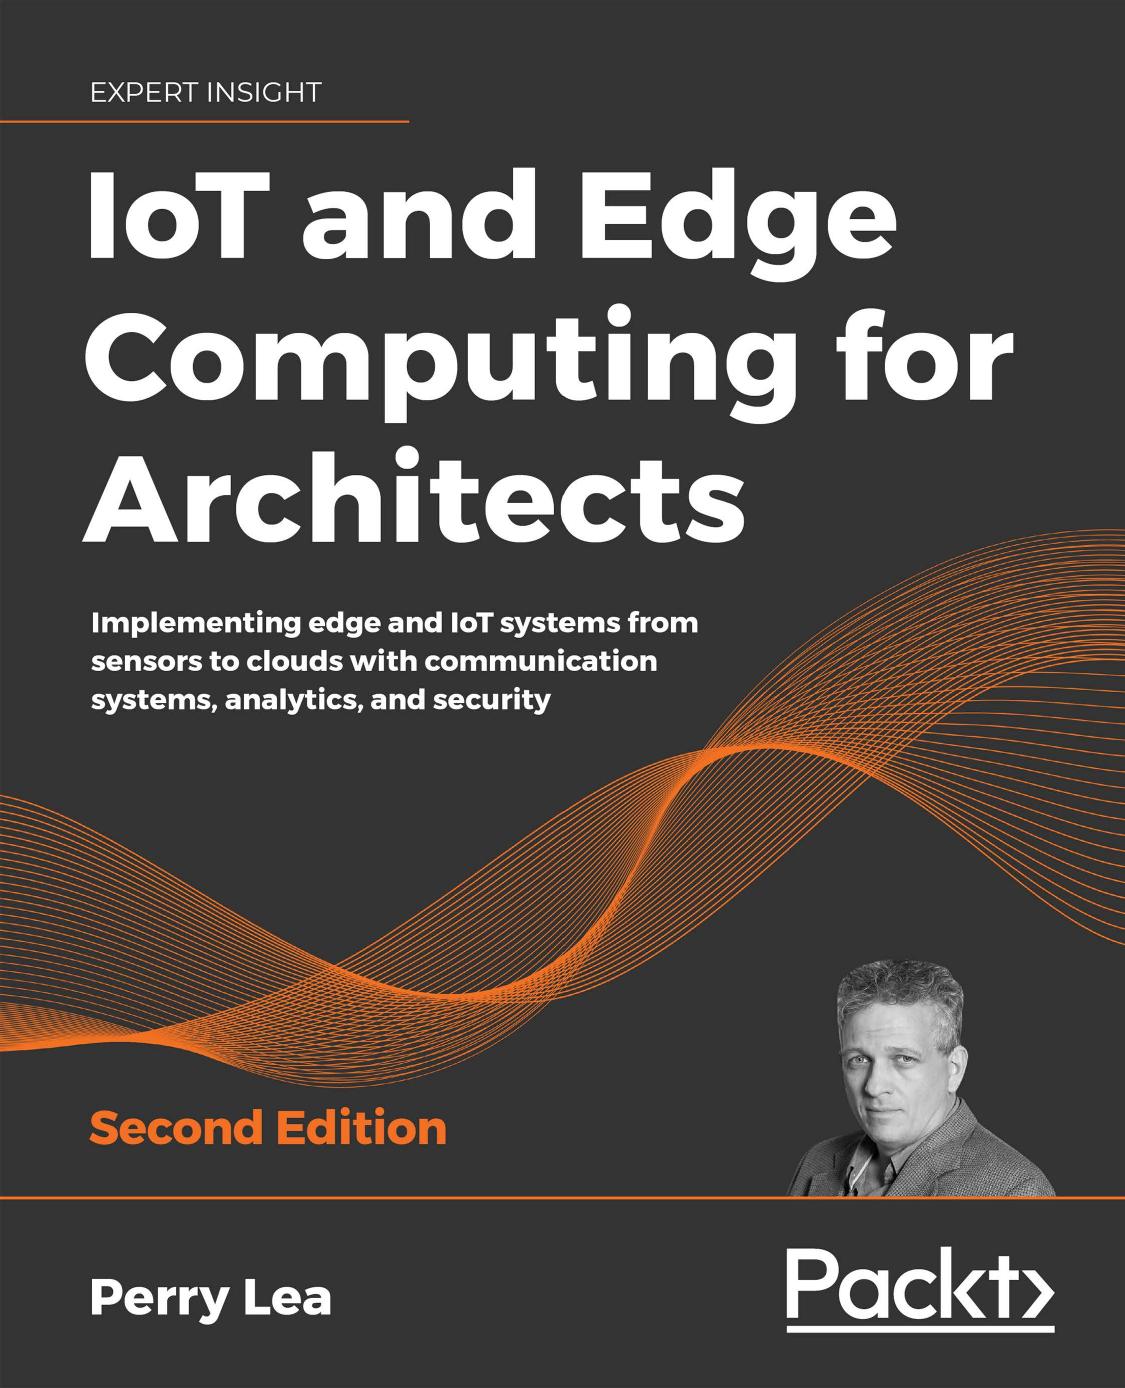 IoT and Edge Computing for Architects by Unknown